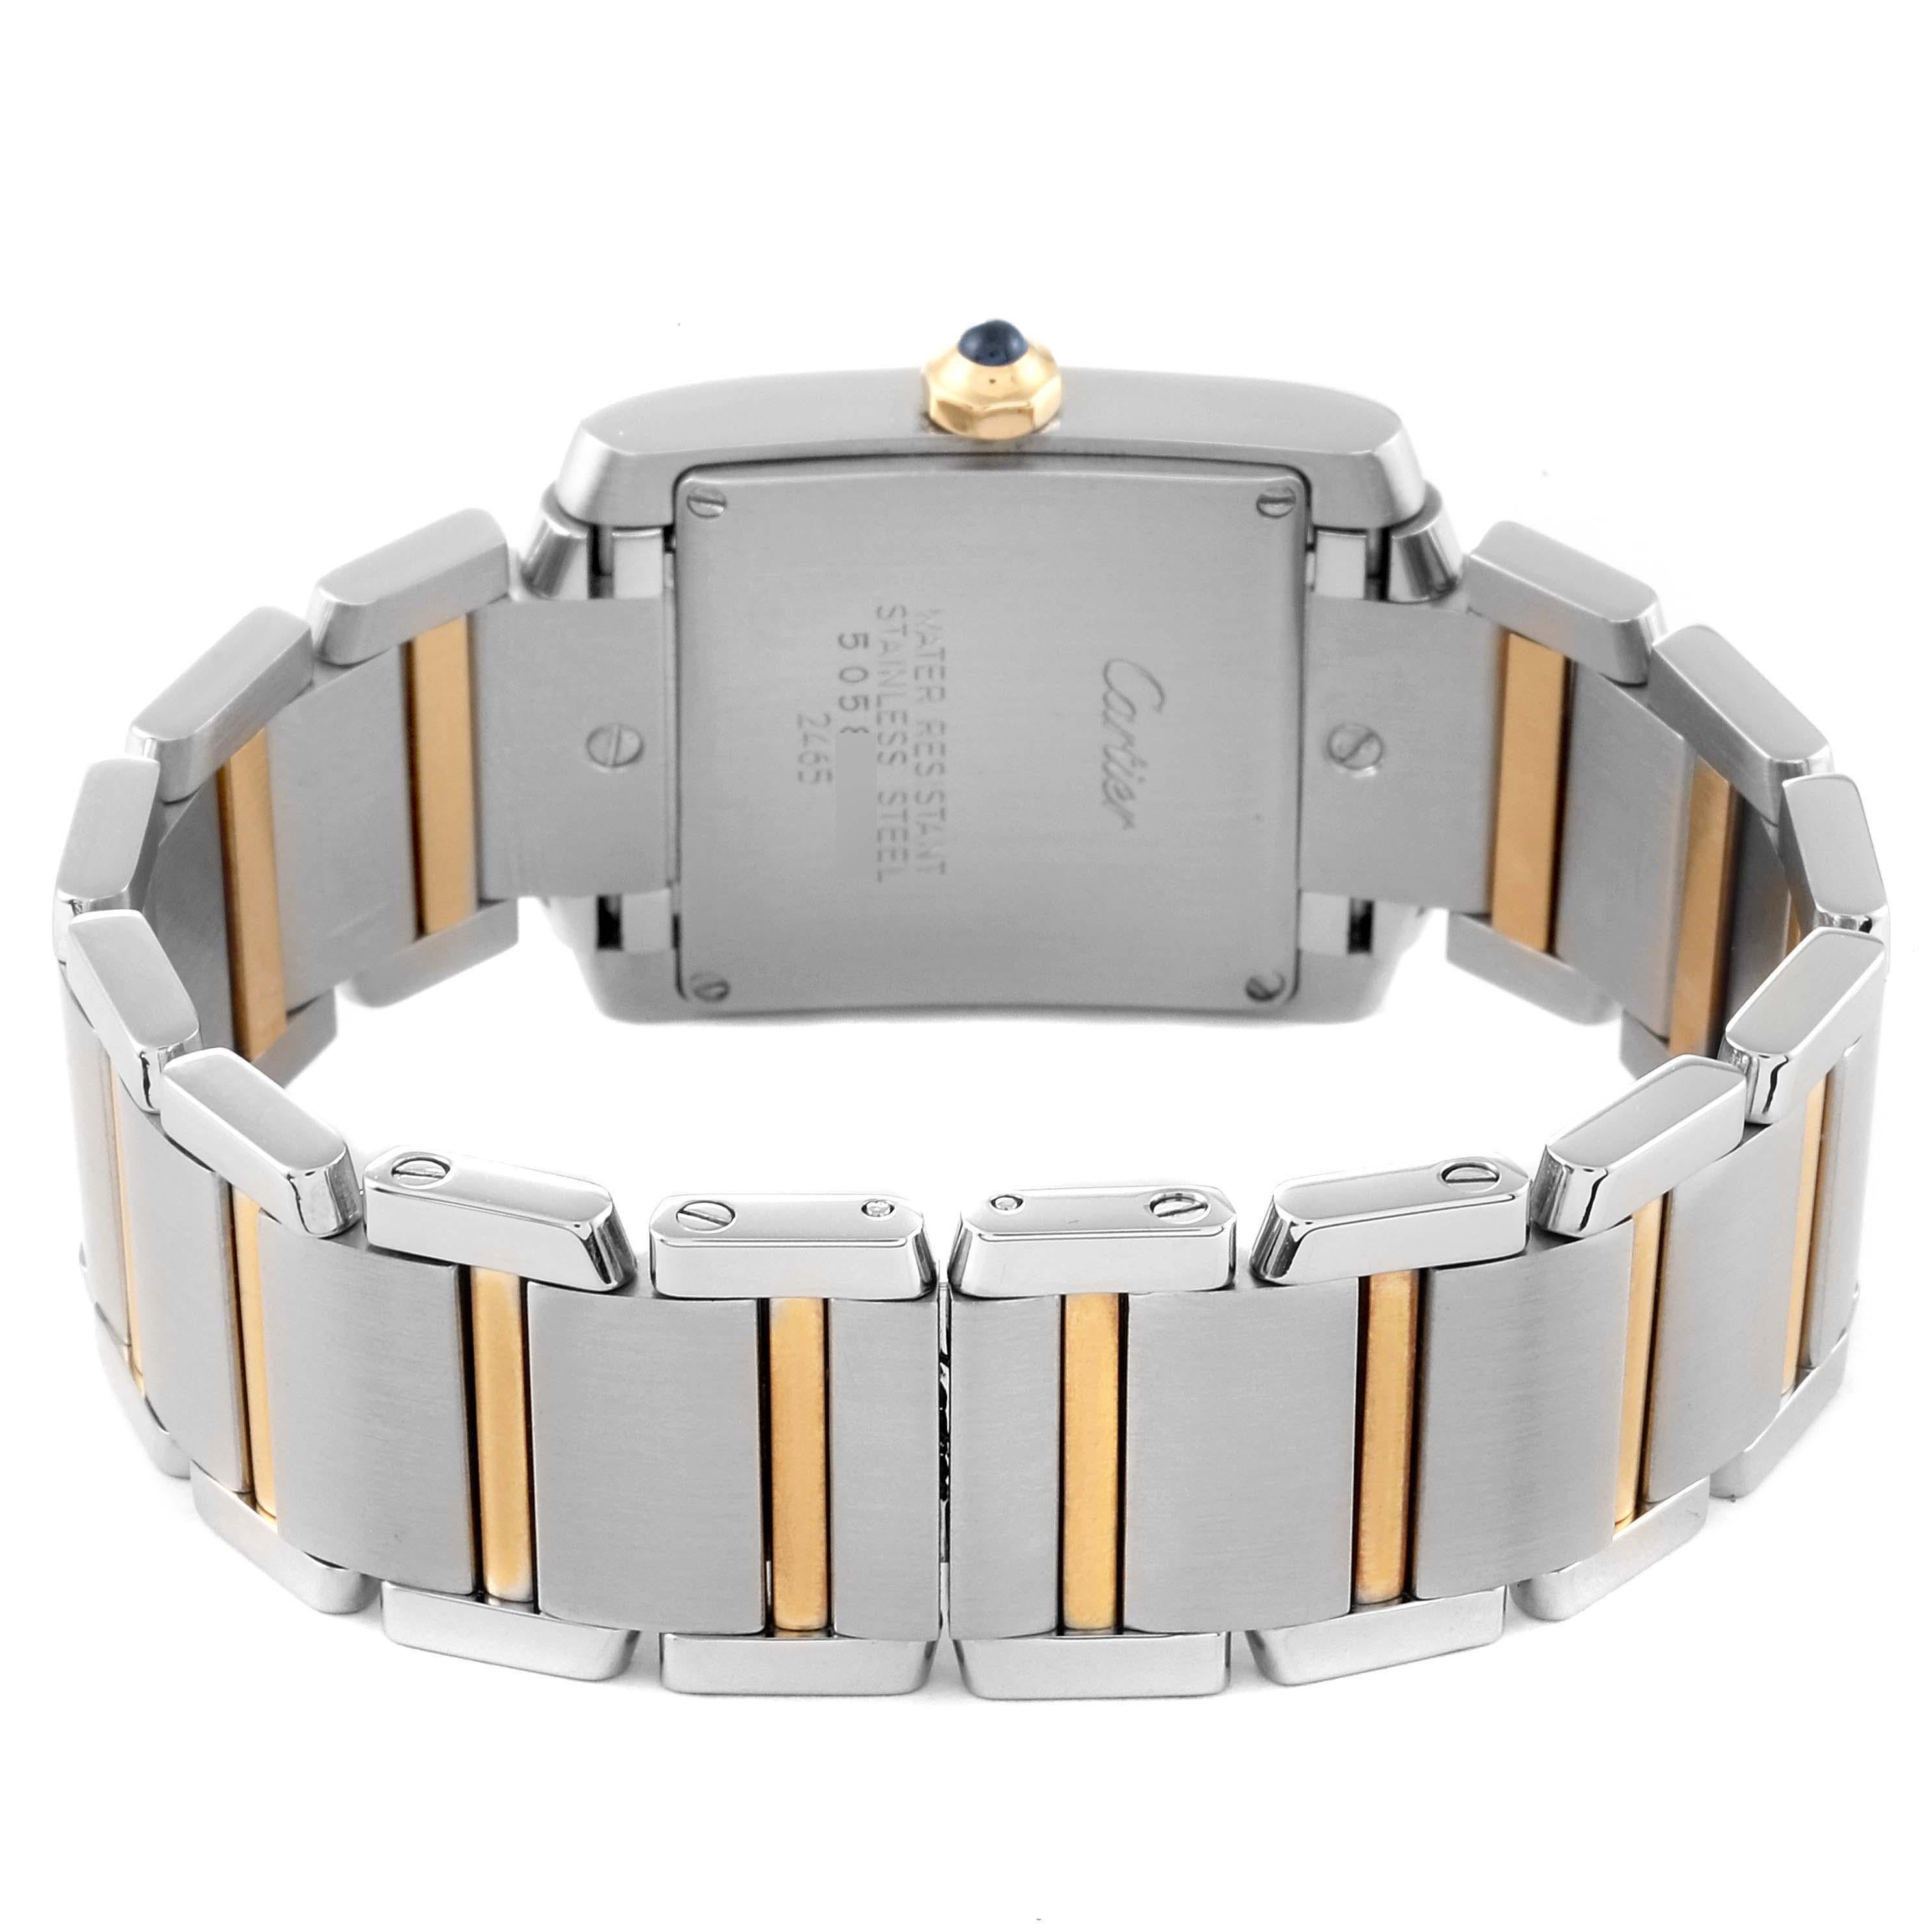 Cartier Tank Francaise Midsize Steel Yellow Gold Ladies Watch W51012Q4 3